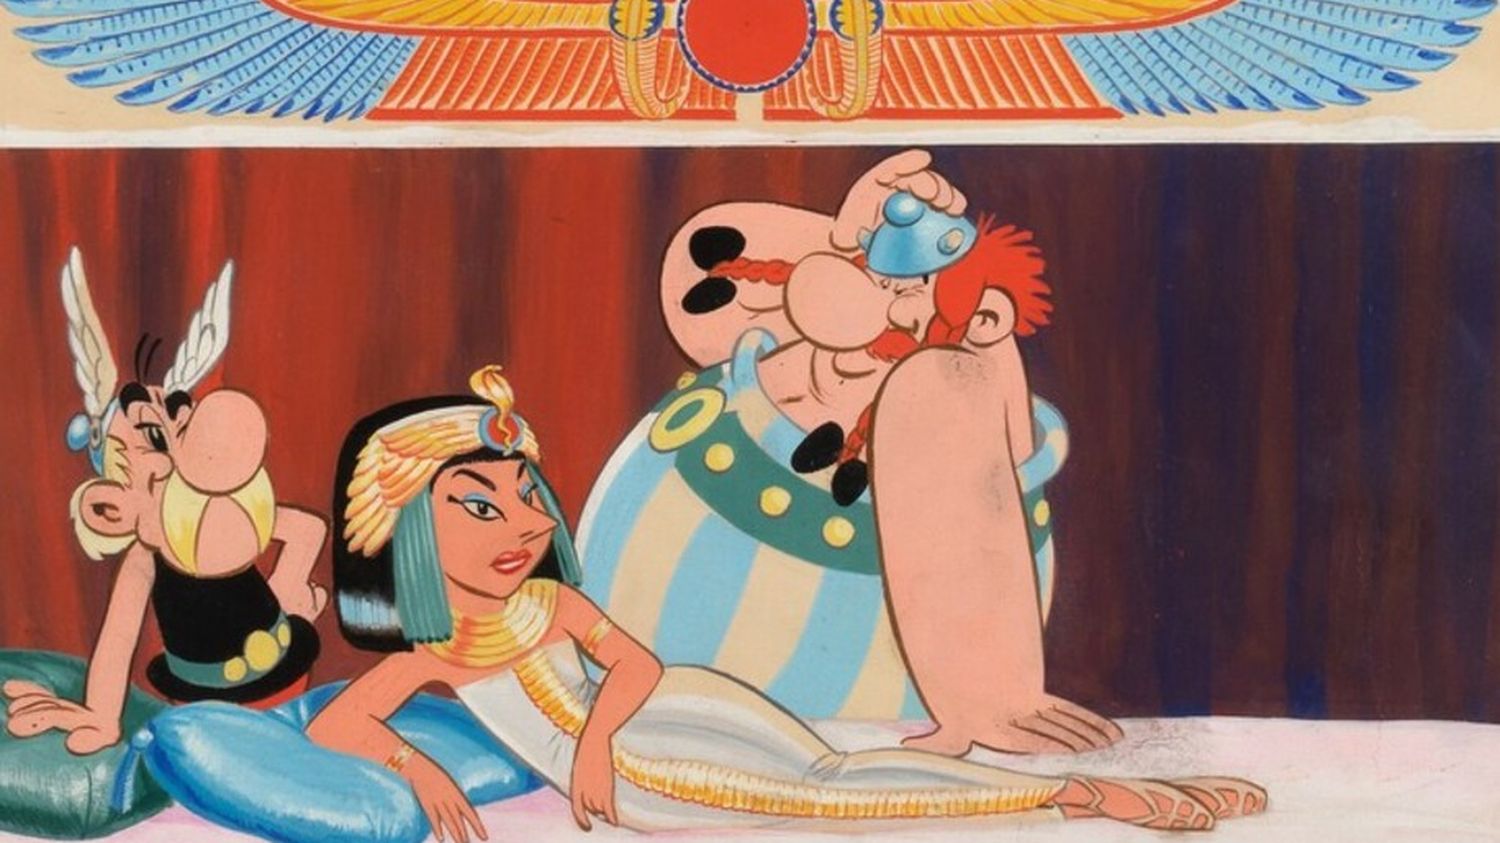 The original cover of "Asterix and Cleopatra", put up for auction despite complaints from Uderz's daughter, did not find a buyer